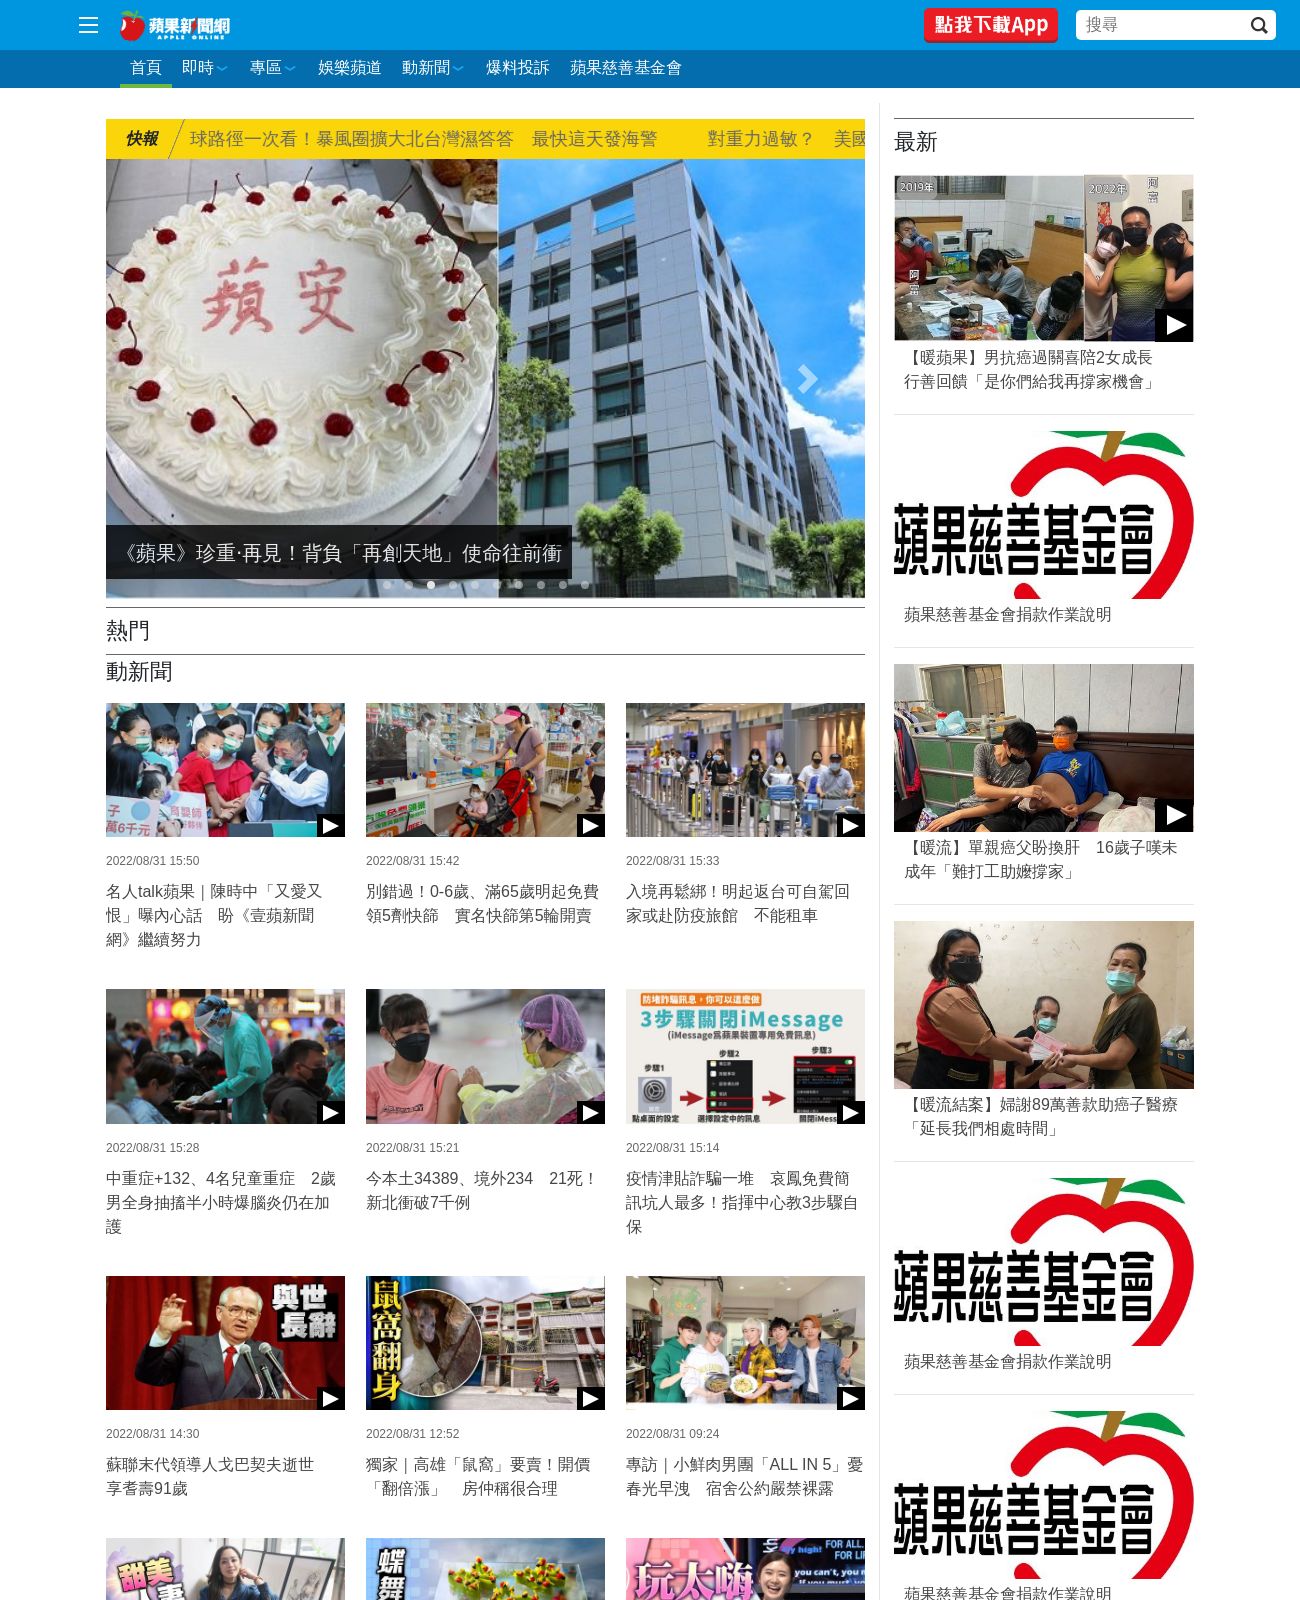 Apple Daily at 2022-09-14 22:15:31+08:00 local time